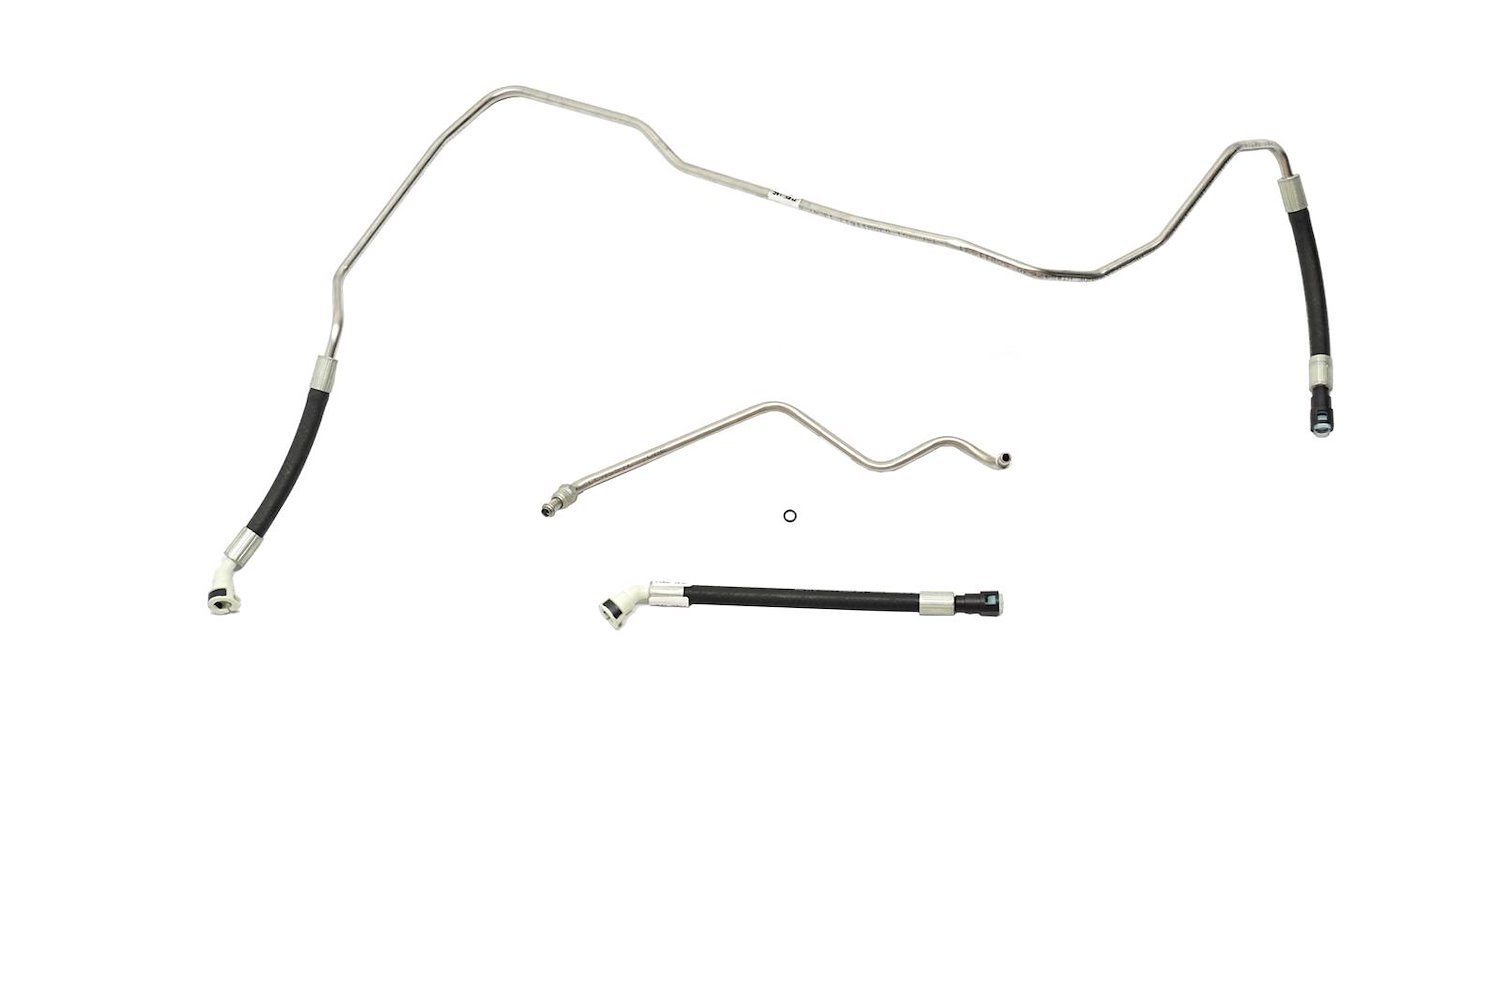 Chevy / GMC Tahoe Fuel Supply Line -2003